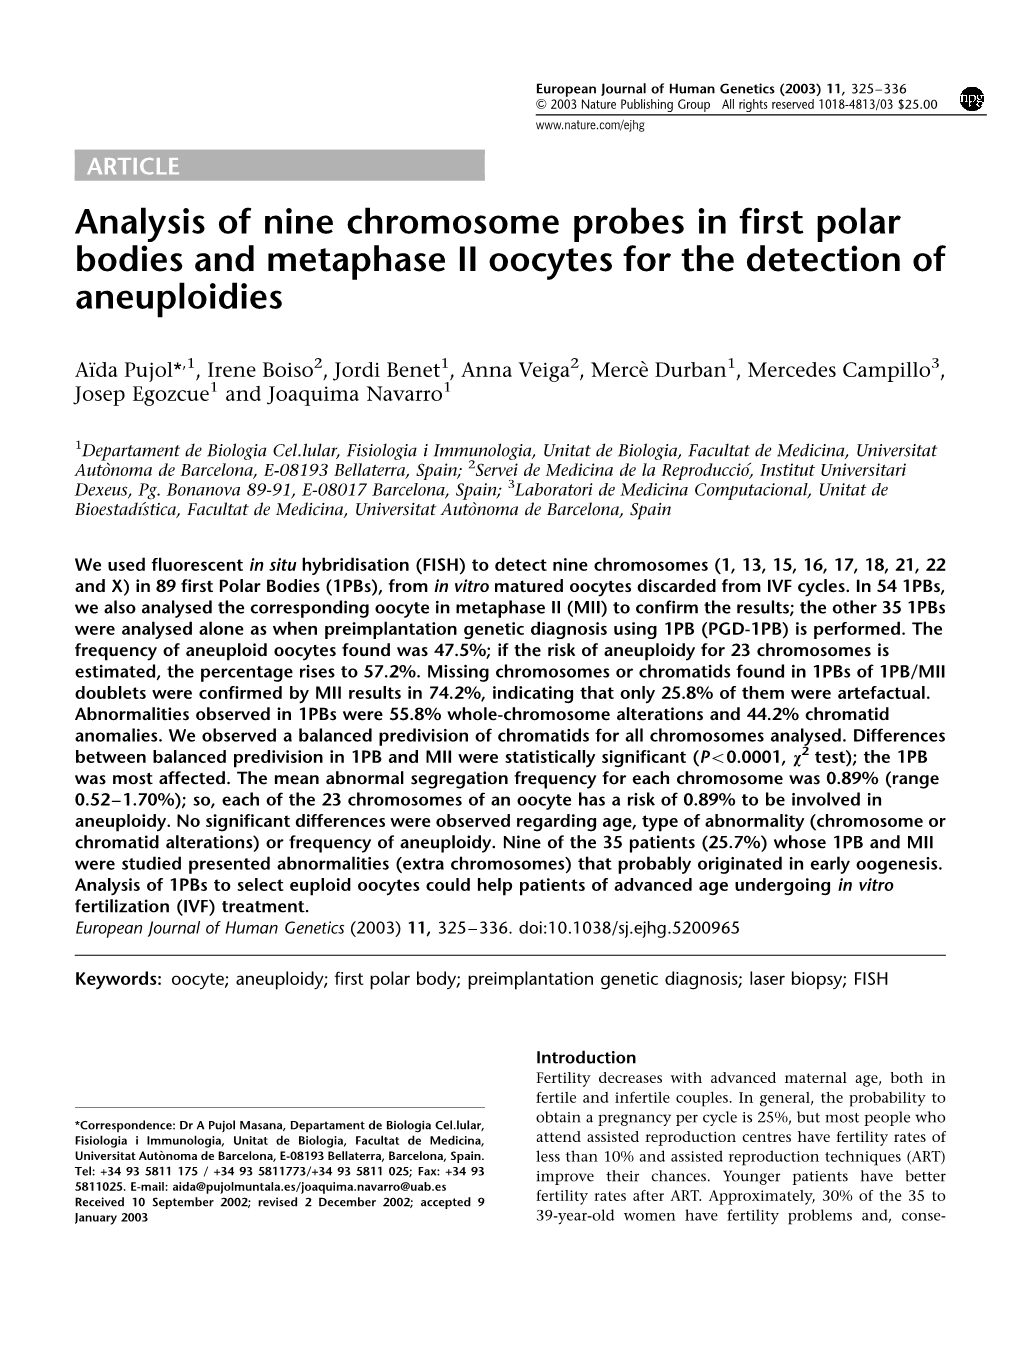 Analysis of Nine Chromosome Probes in First Polar Bodies and Metaphase II Oocytes for the Detection of Aneuploidies